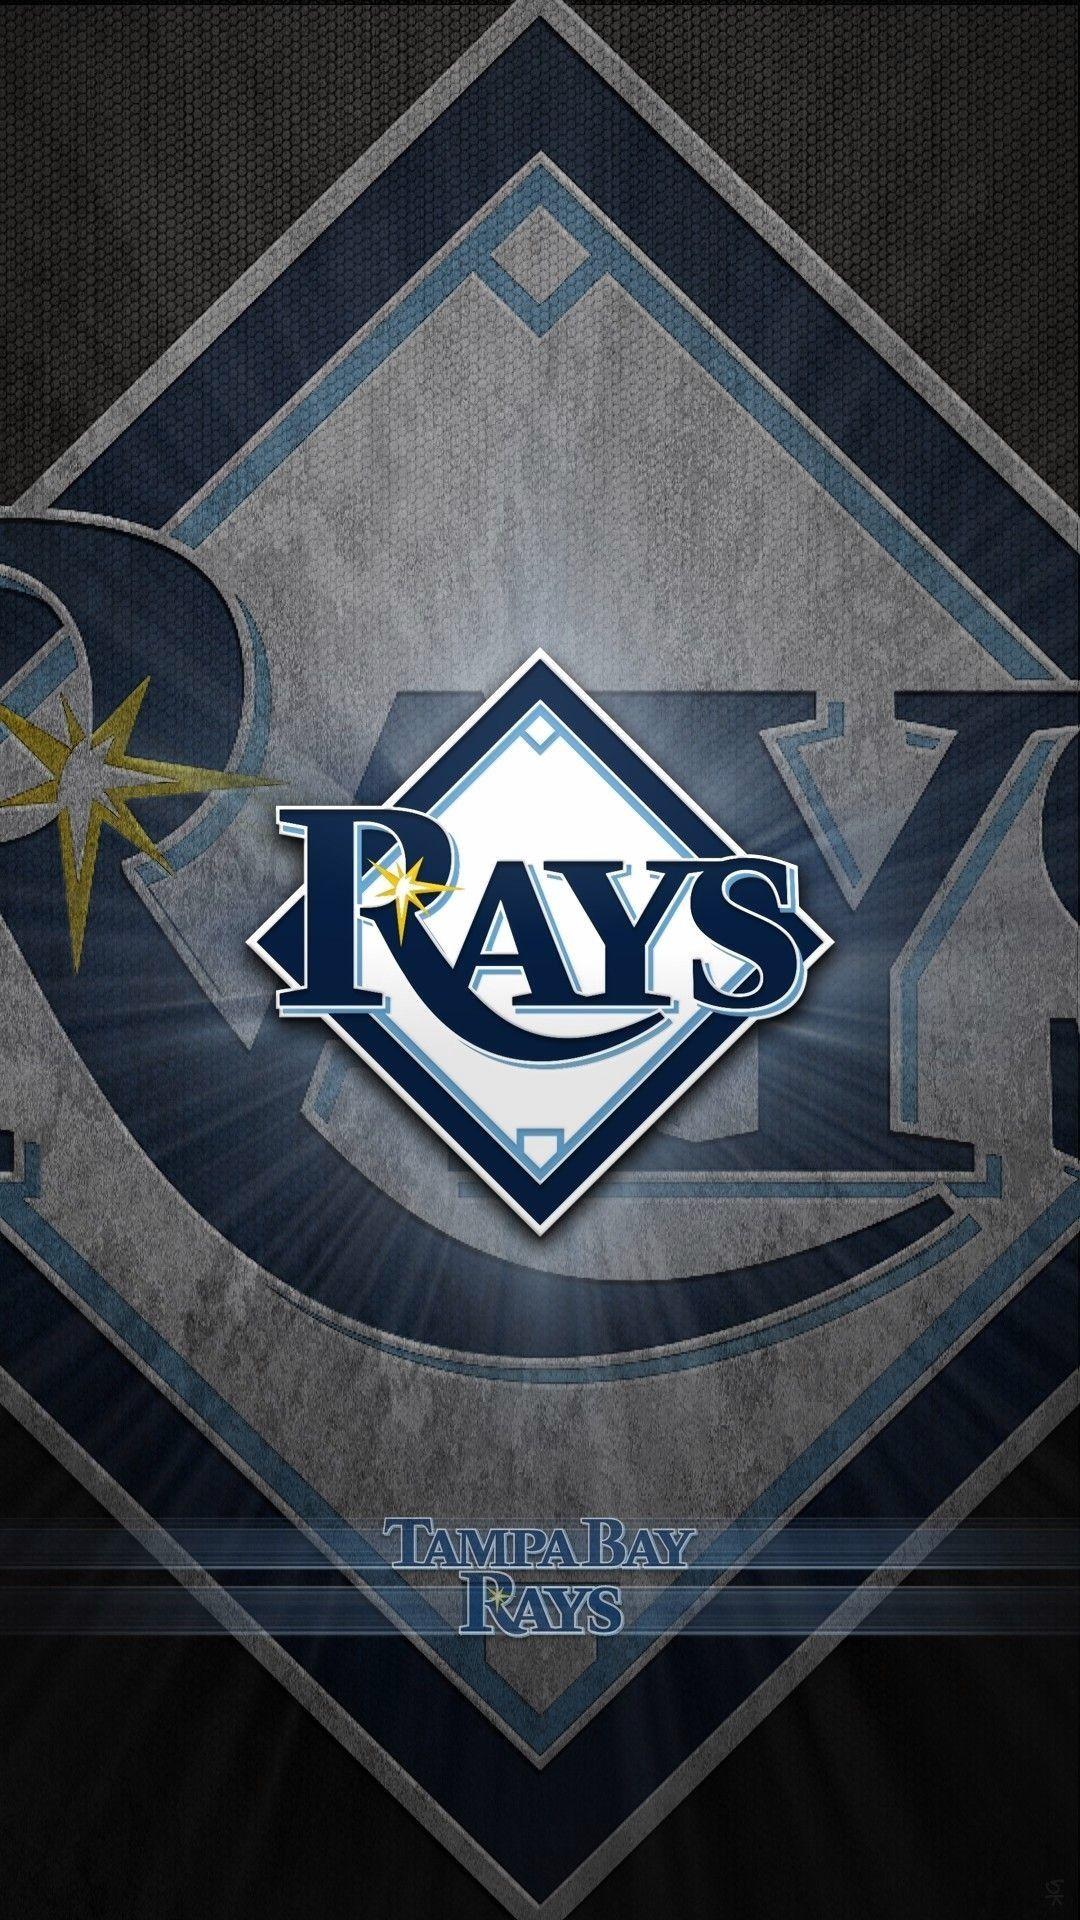 Tampa Bay Rays wallpaper by eddy0513 - 0b - Free on ZEDGE™